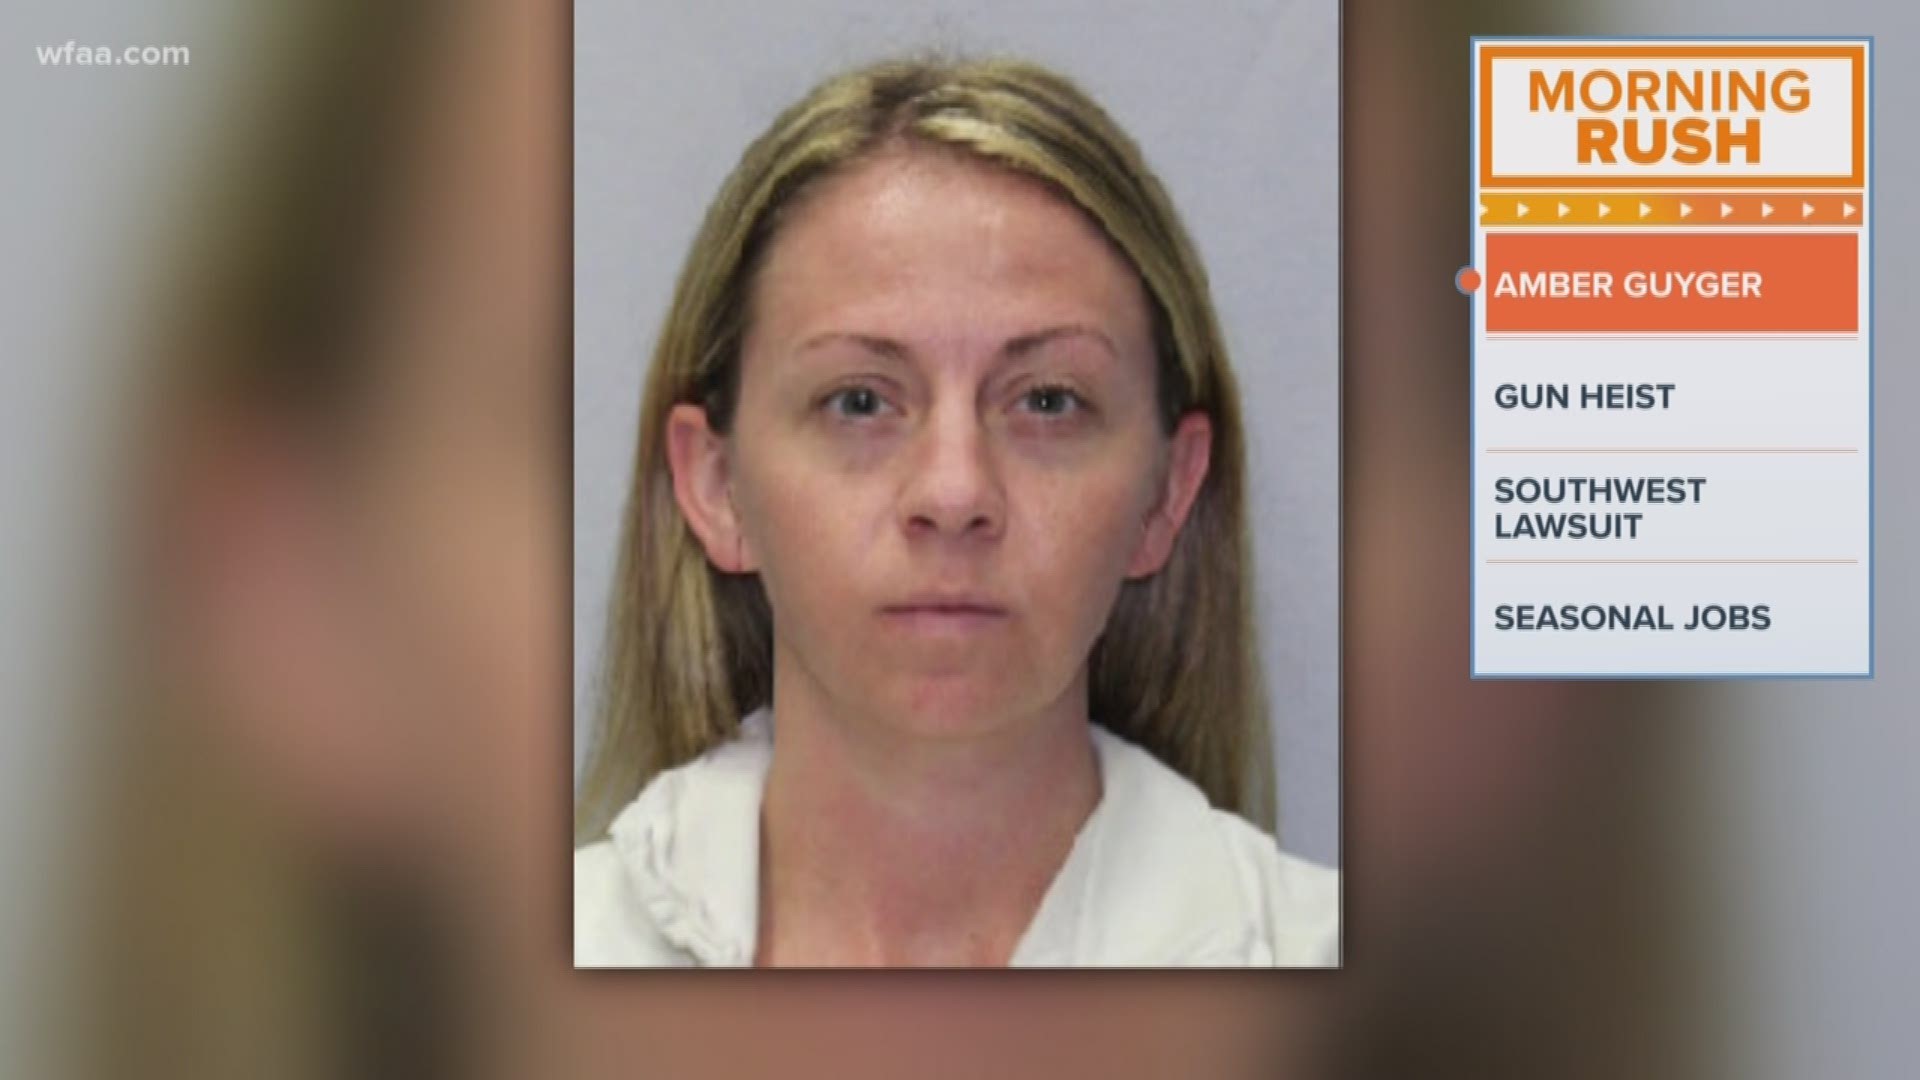 Amber Guyger is waking up in a Texas prison in Gatesville to begin her sentence.